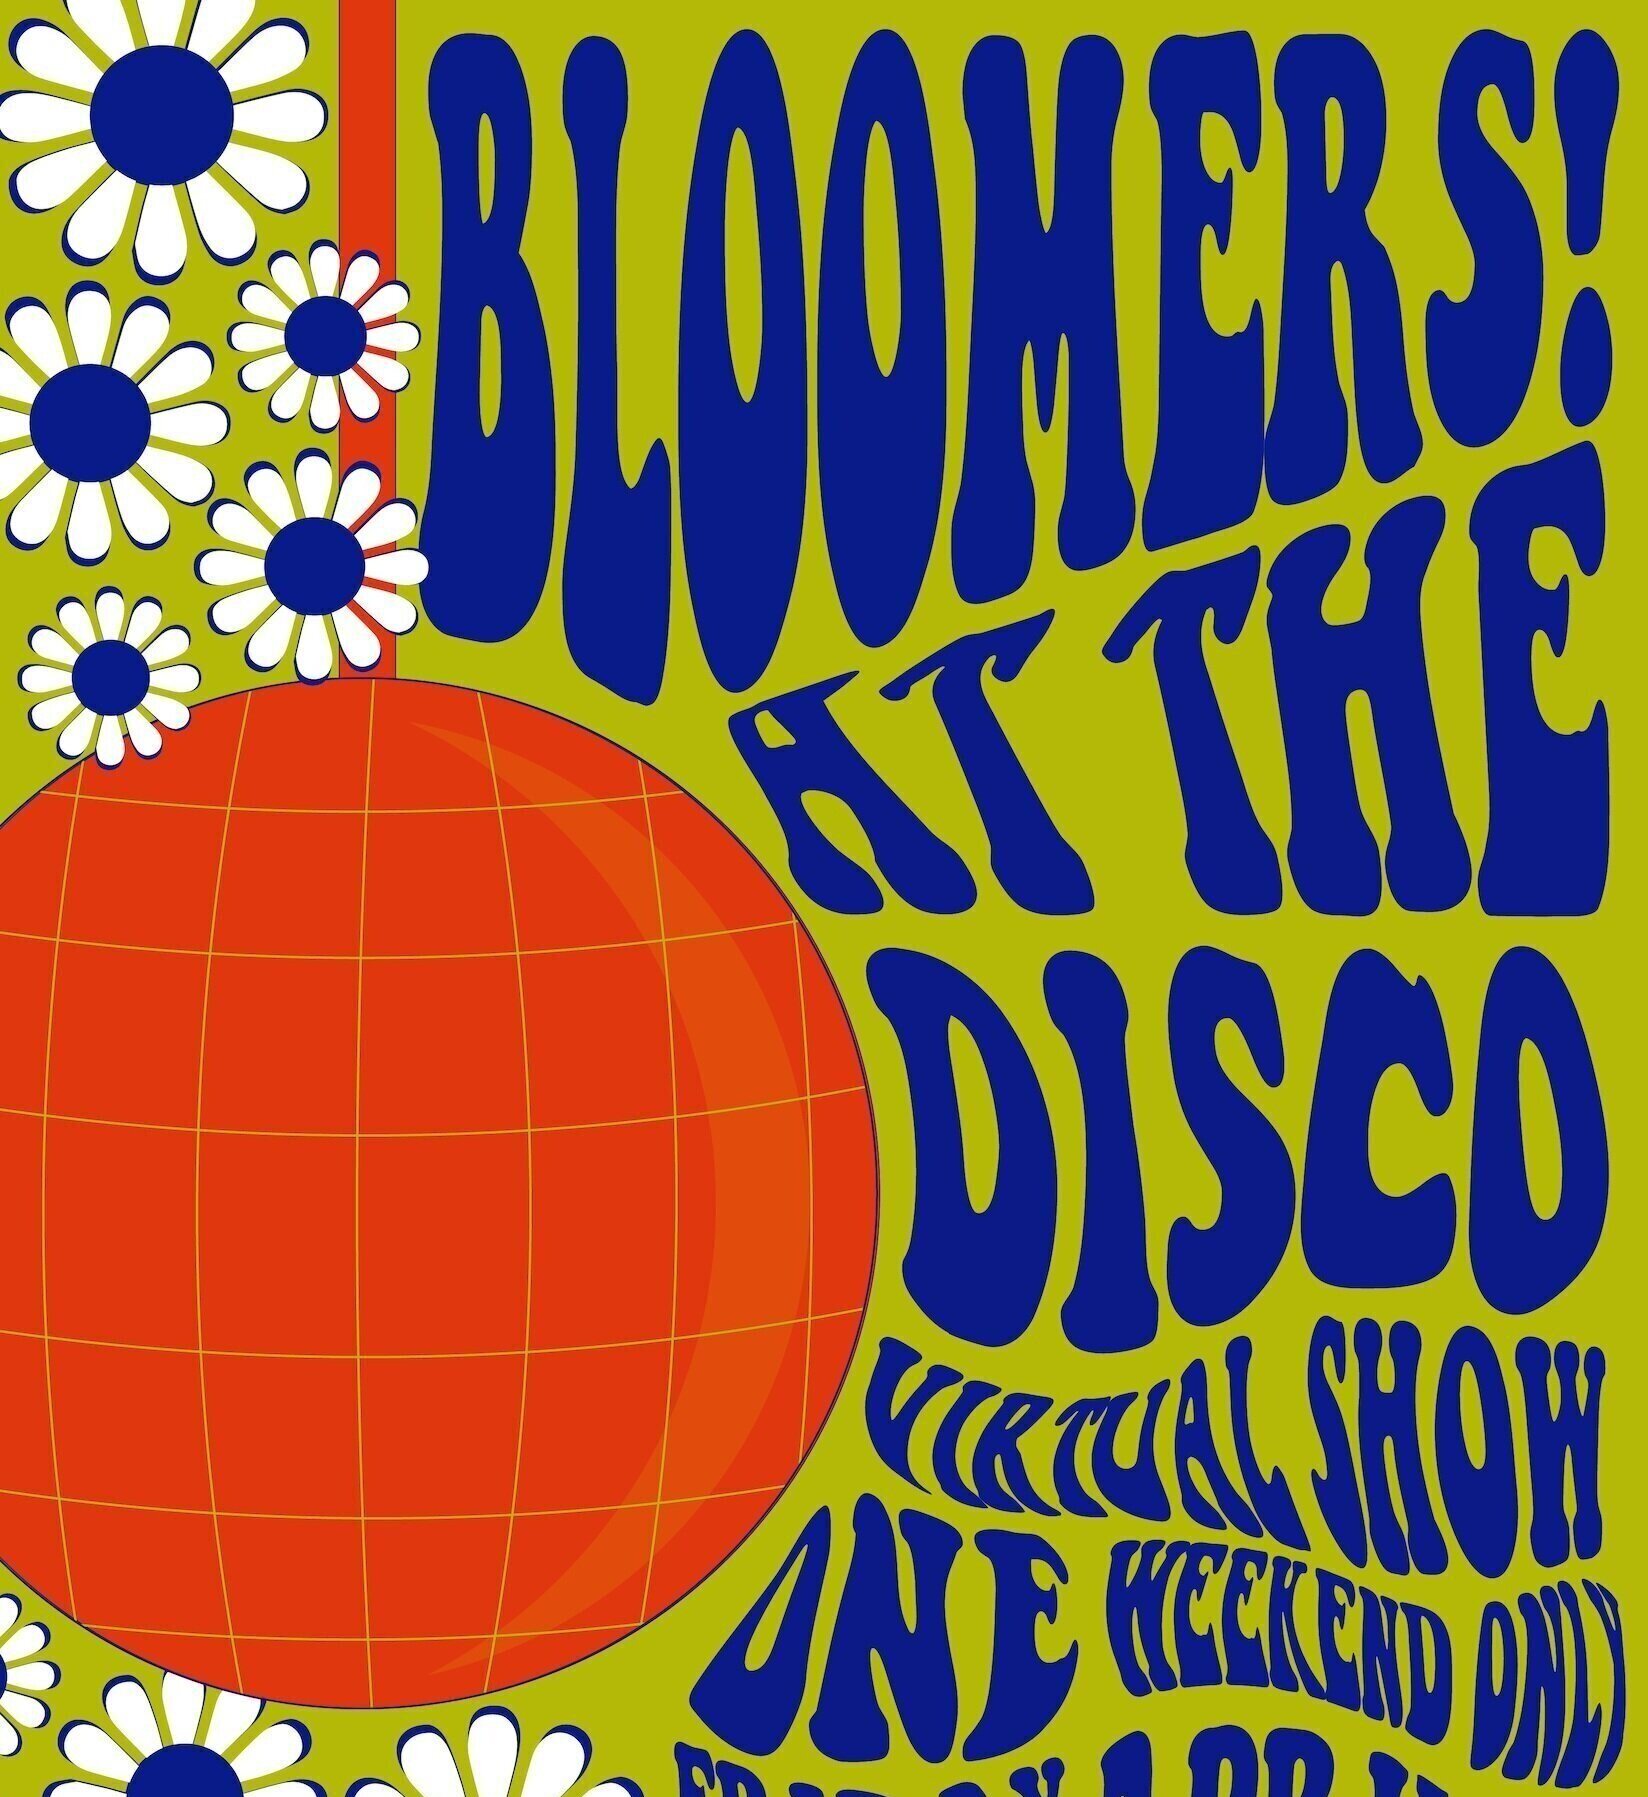 Bloomer's Spring 2021 Virtual Show